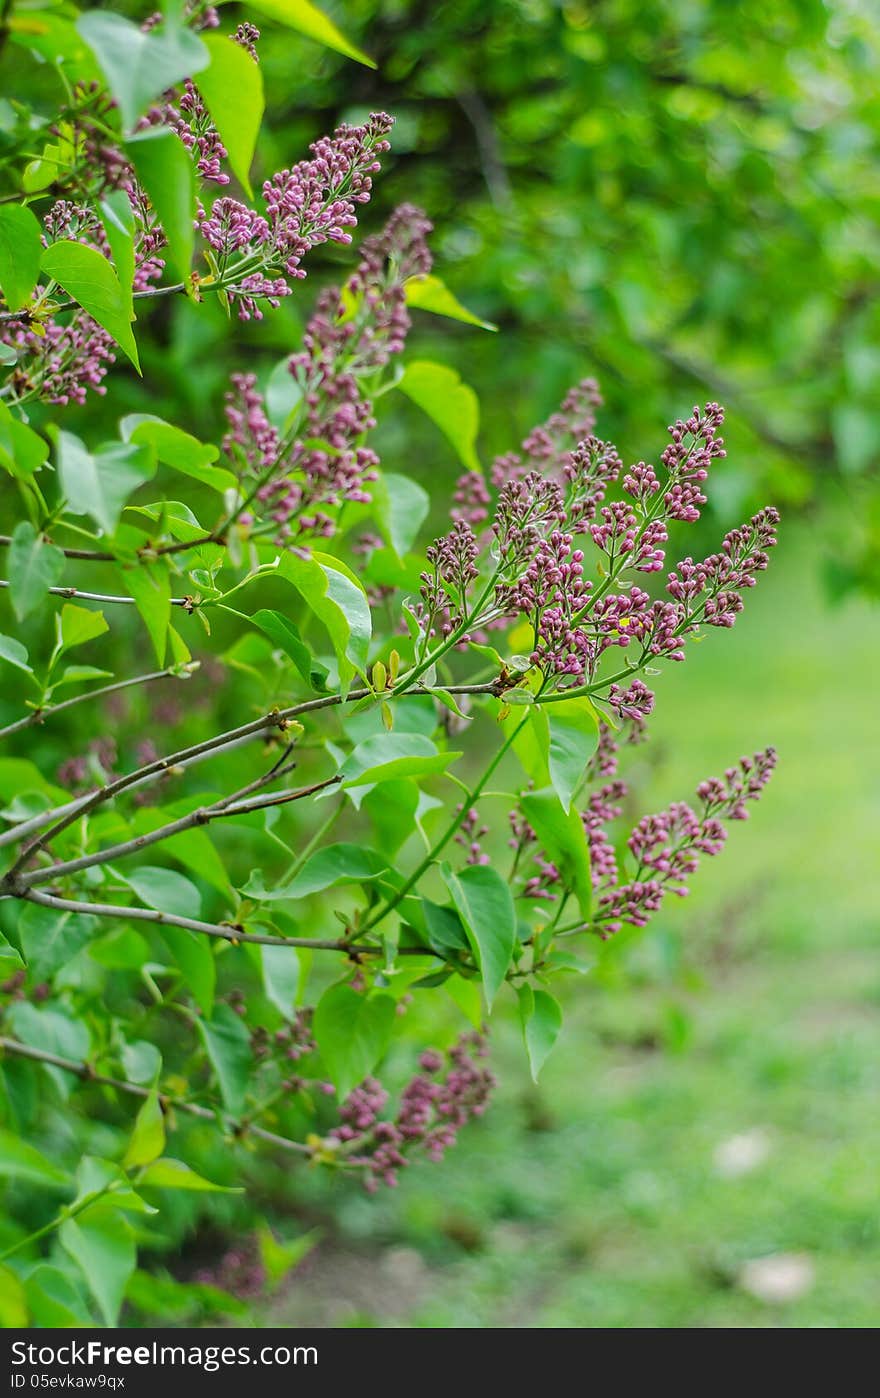 Lilac branches with leaves and flowers. Lilac branches with leaves and flowers